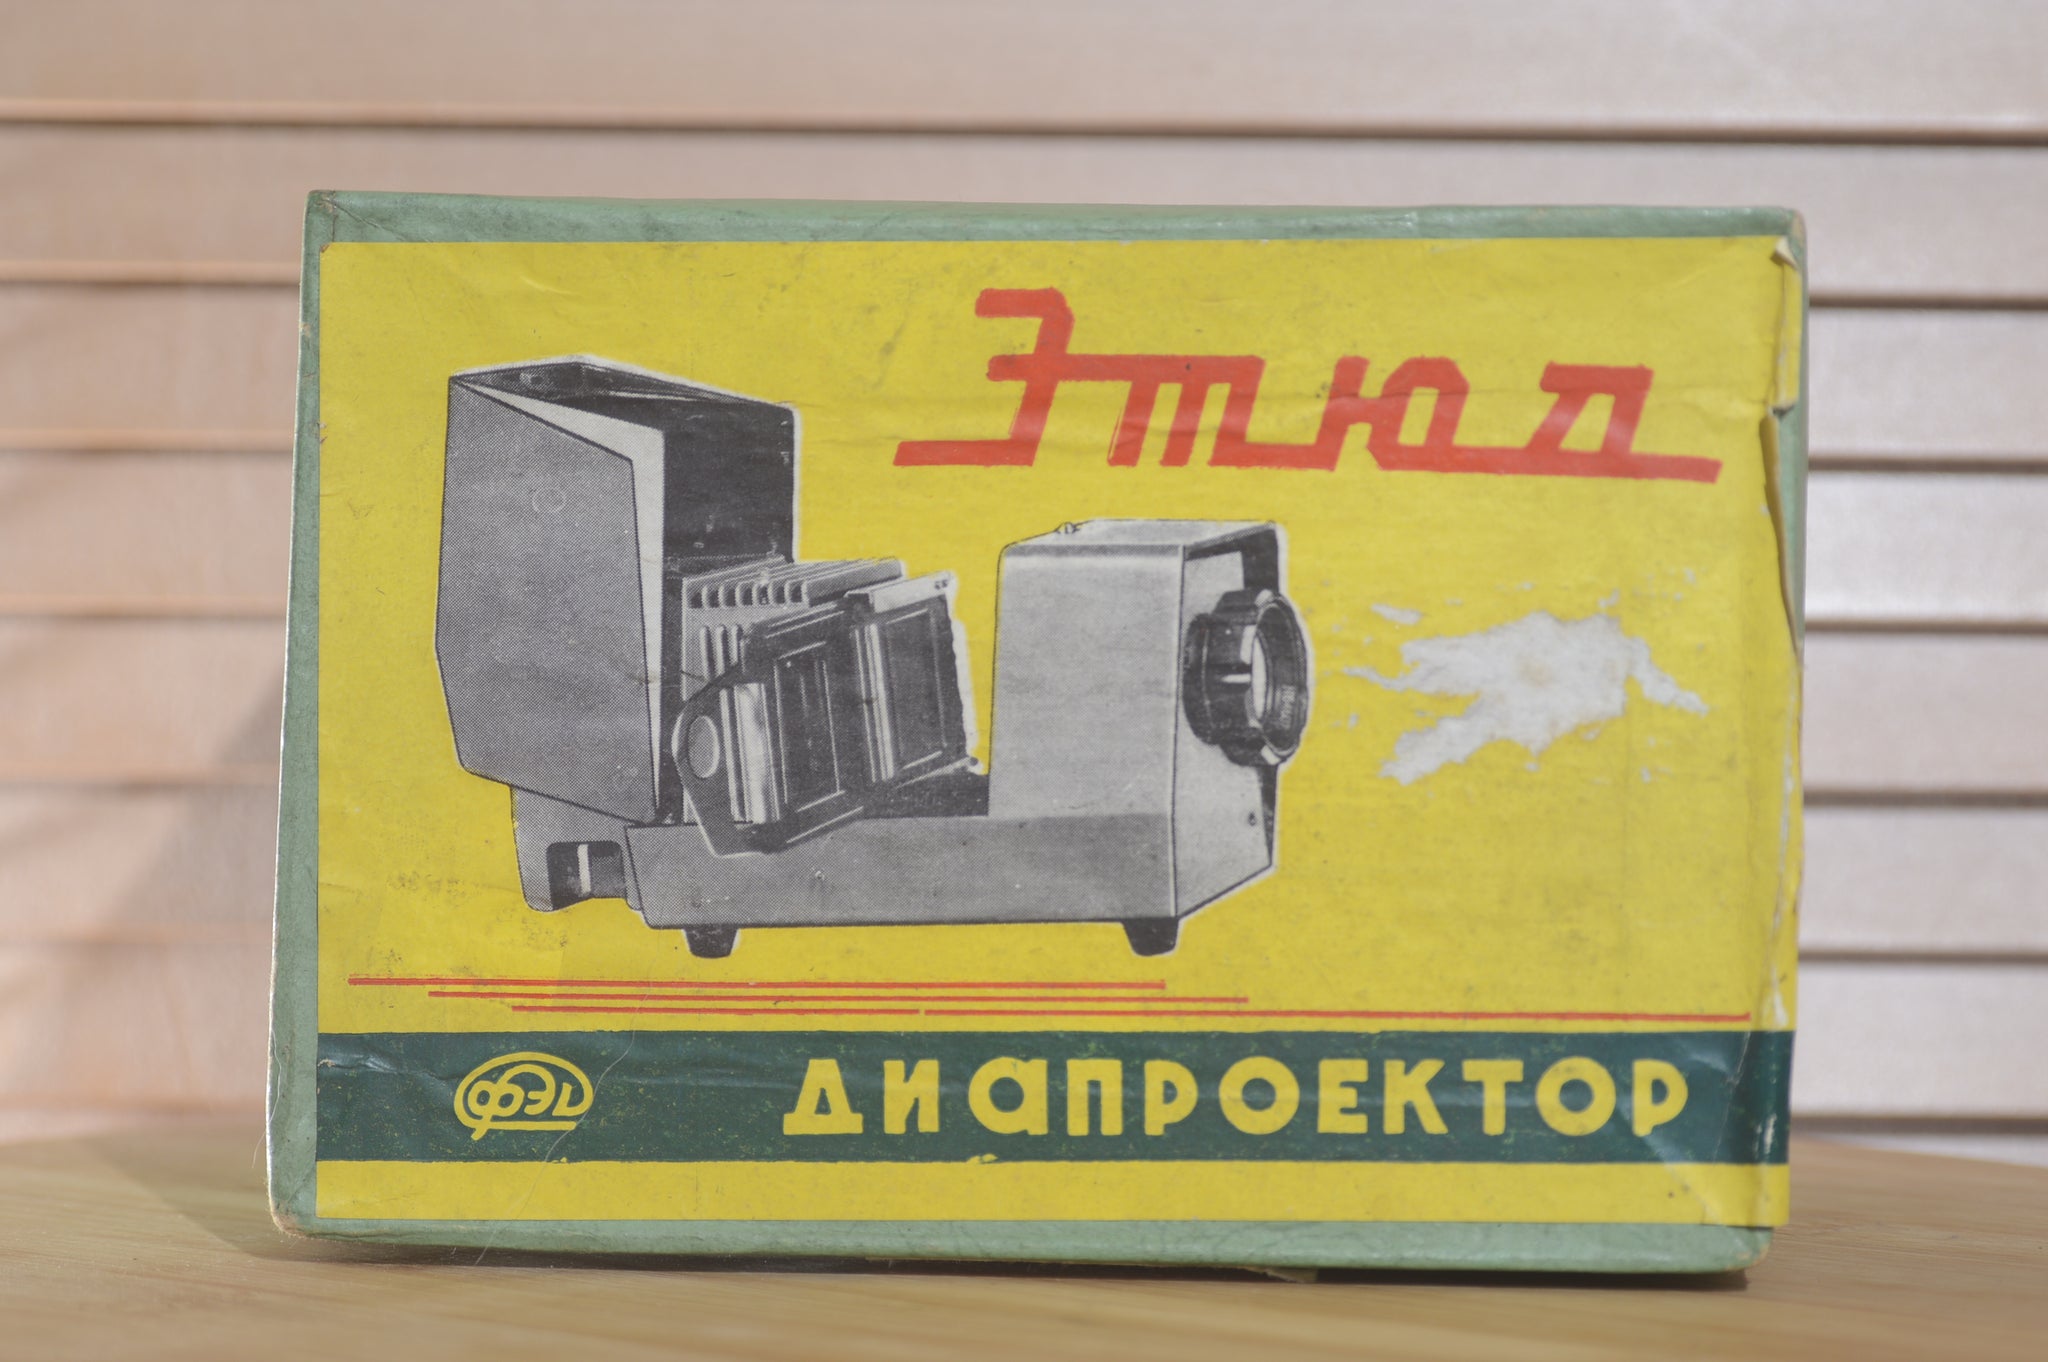 Boxed Etude USSR still slide projector. True collectors item.Fantastic condition - RewindCameras quality vintage cameras, fully tested and serviced